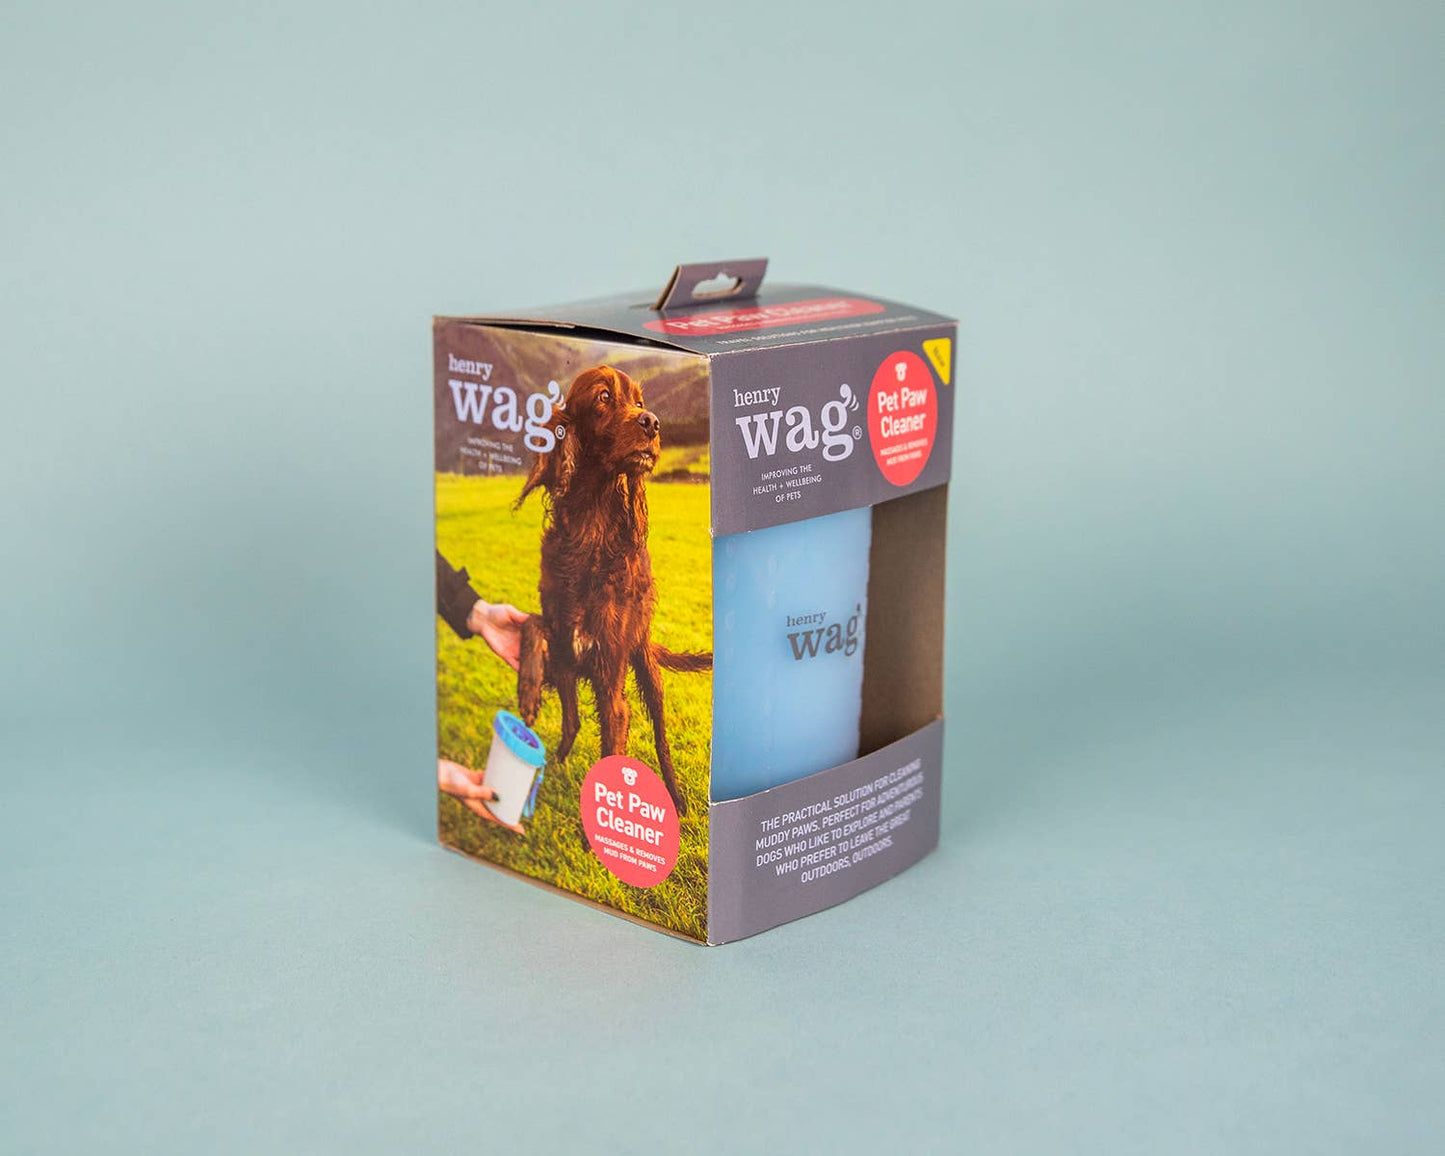 Henry Wag Pet Paw Cleaner